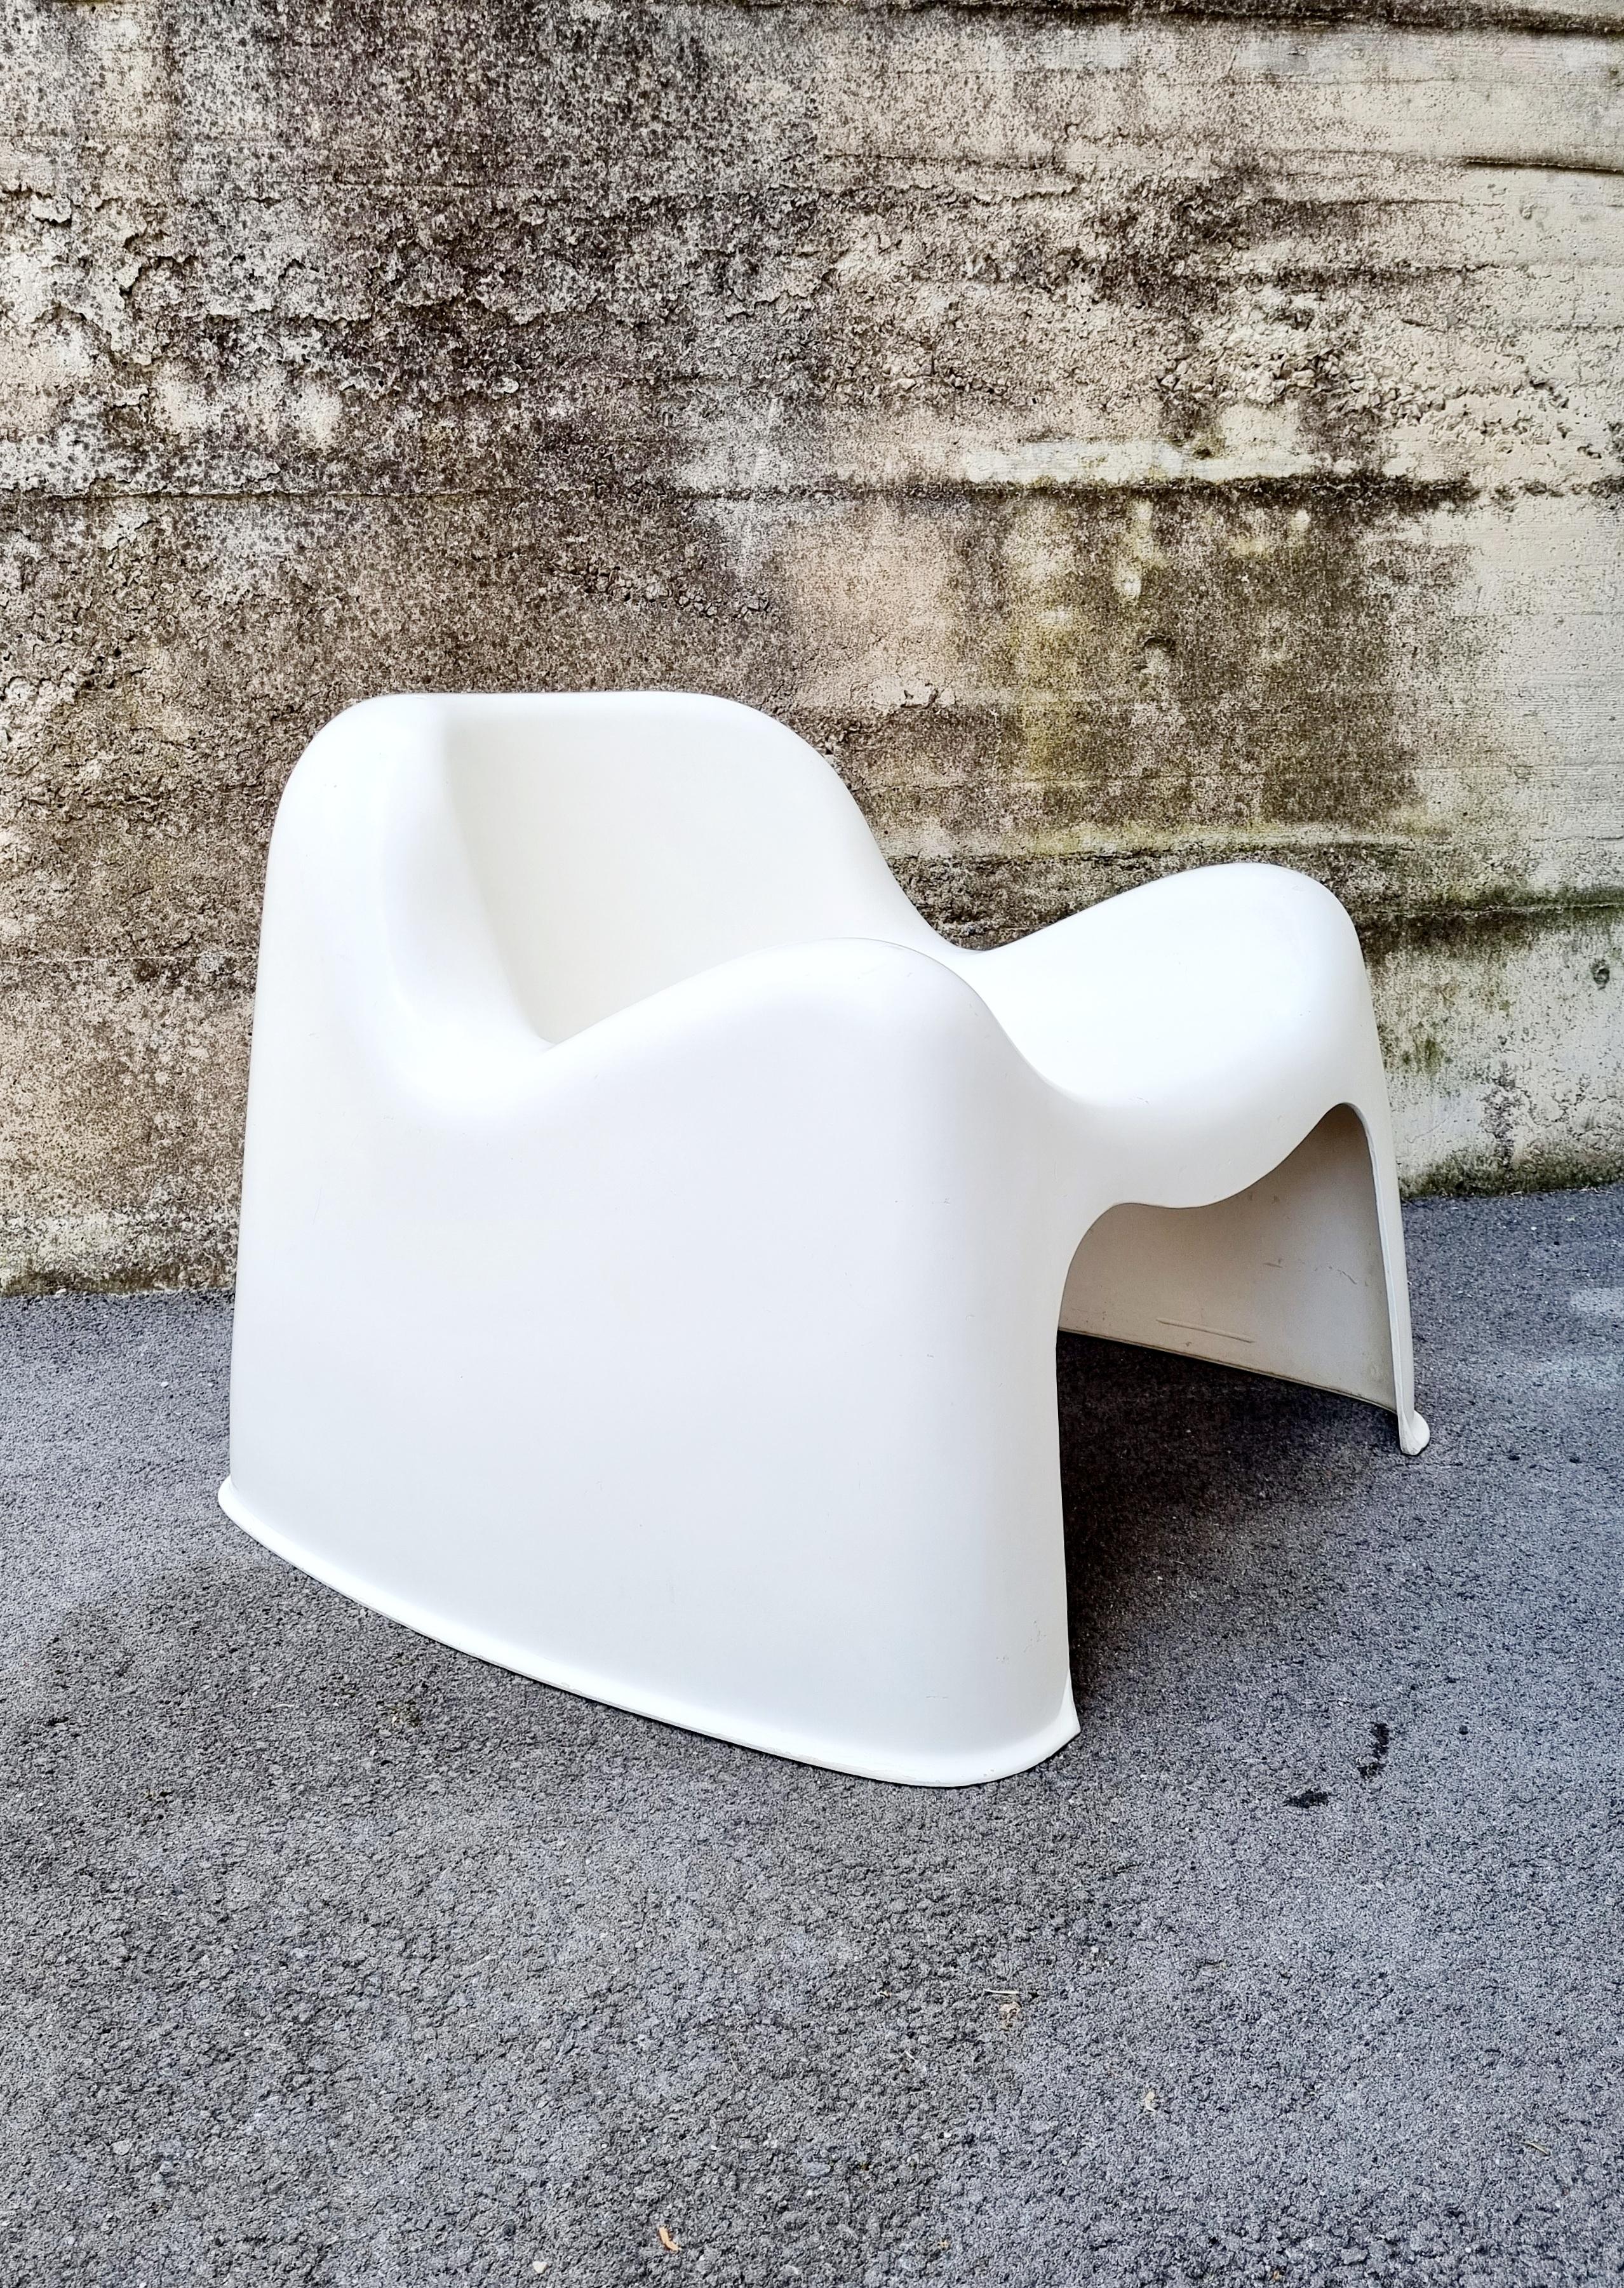 Midcentury White Toga Chair by Sergio Mazza for Artemide, Italy, 1960s For Sale 3